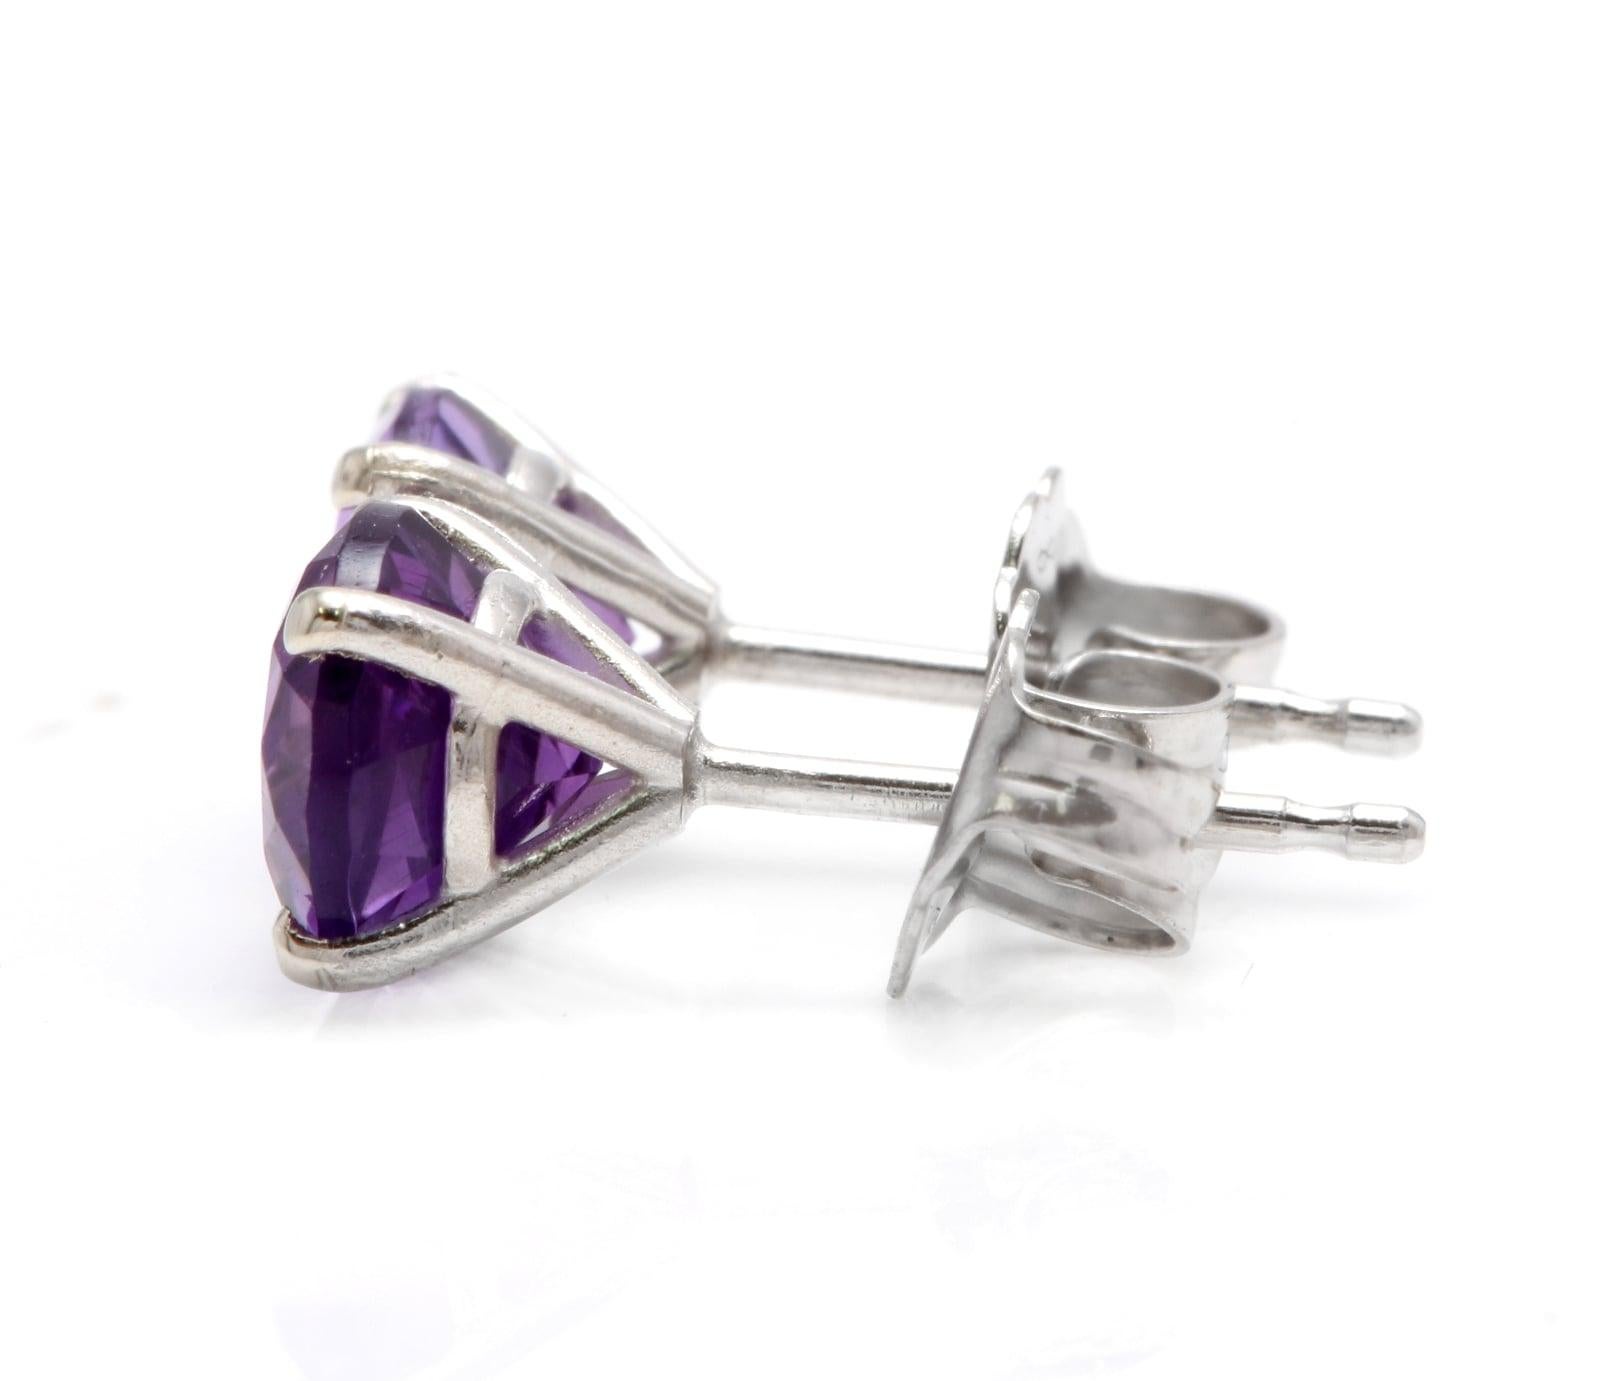 Exquisite 1.80 Carats Natural Amethyst 14K Solid White Gold Martini Stud Earrings

Amazing looking piece!

Total Natural Round Cut Amethyst Weight: 1.80 Carats (both earrings)

Amethyst Measures: 6mm

Total Earrings Weight is: 1.1 grams

Disclaimer: